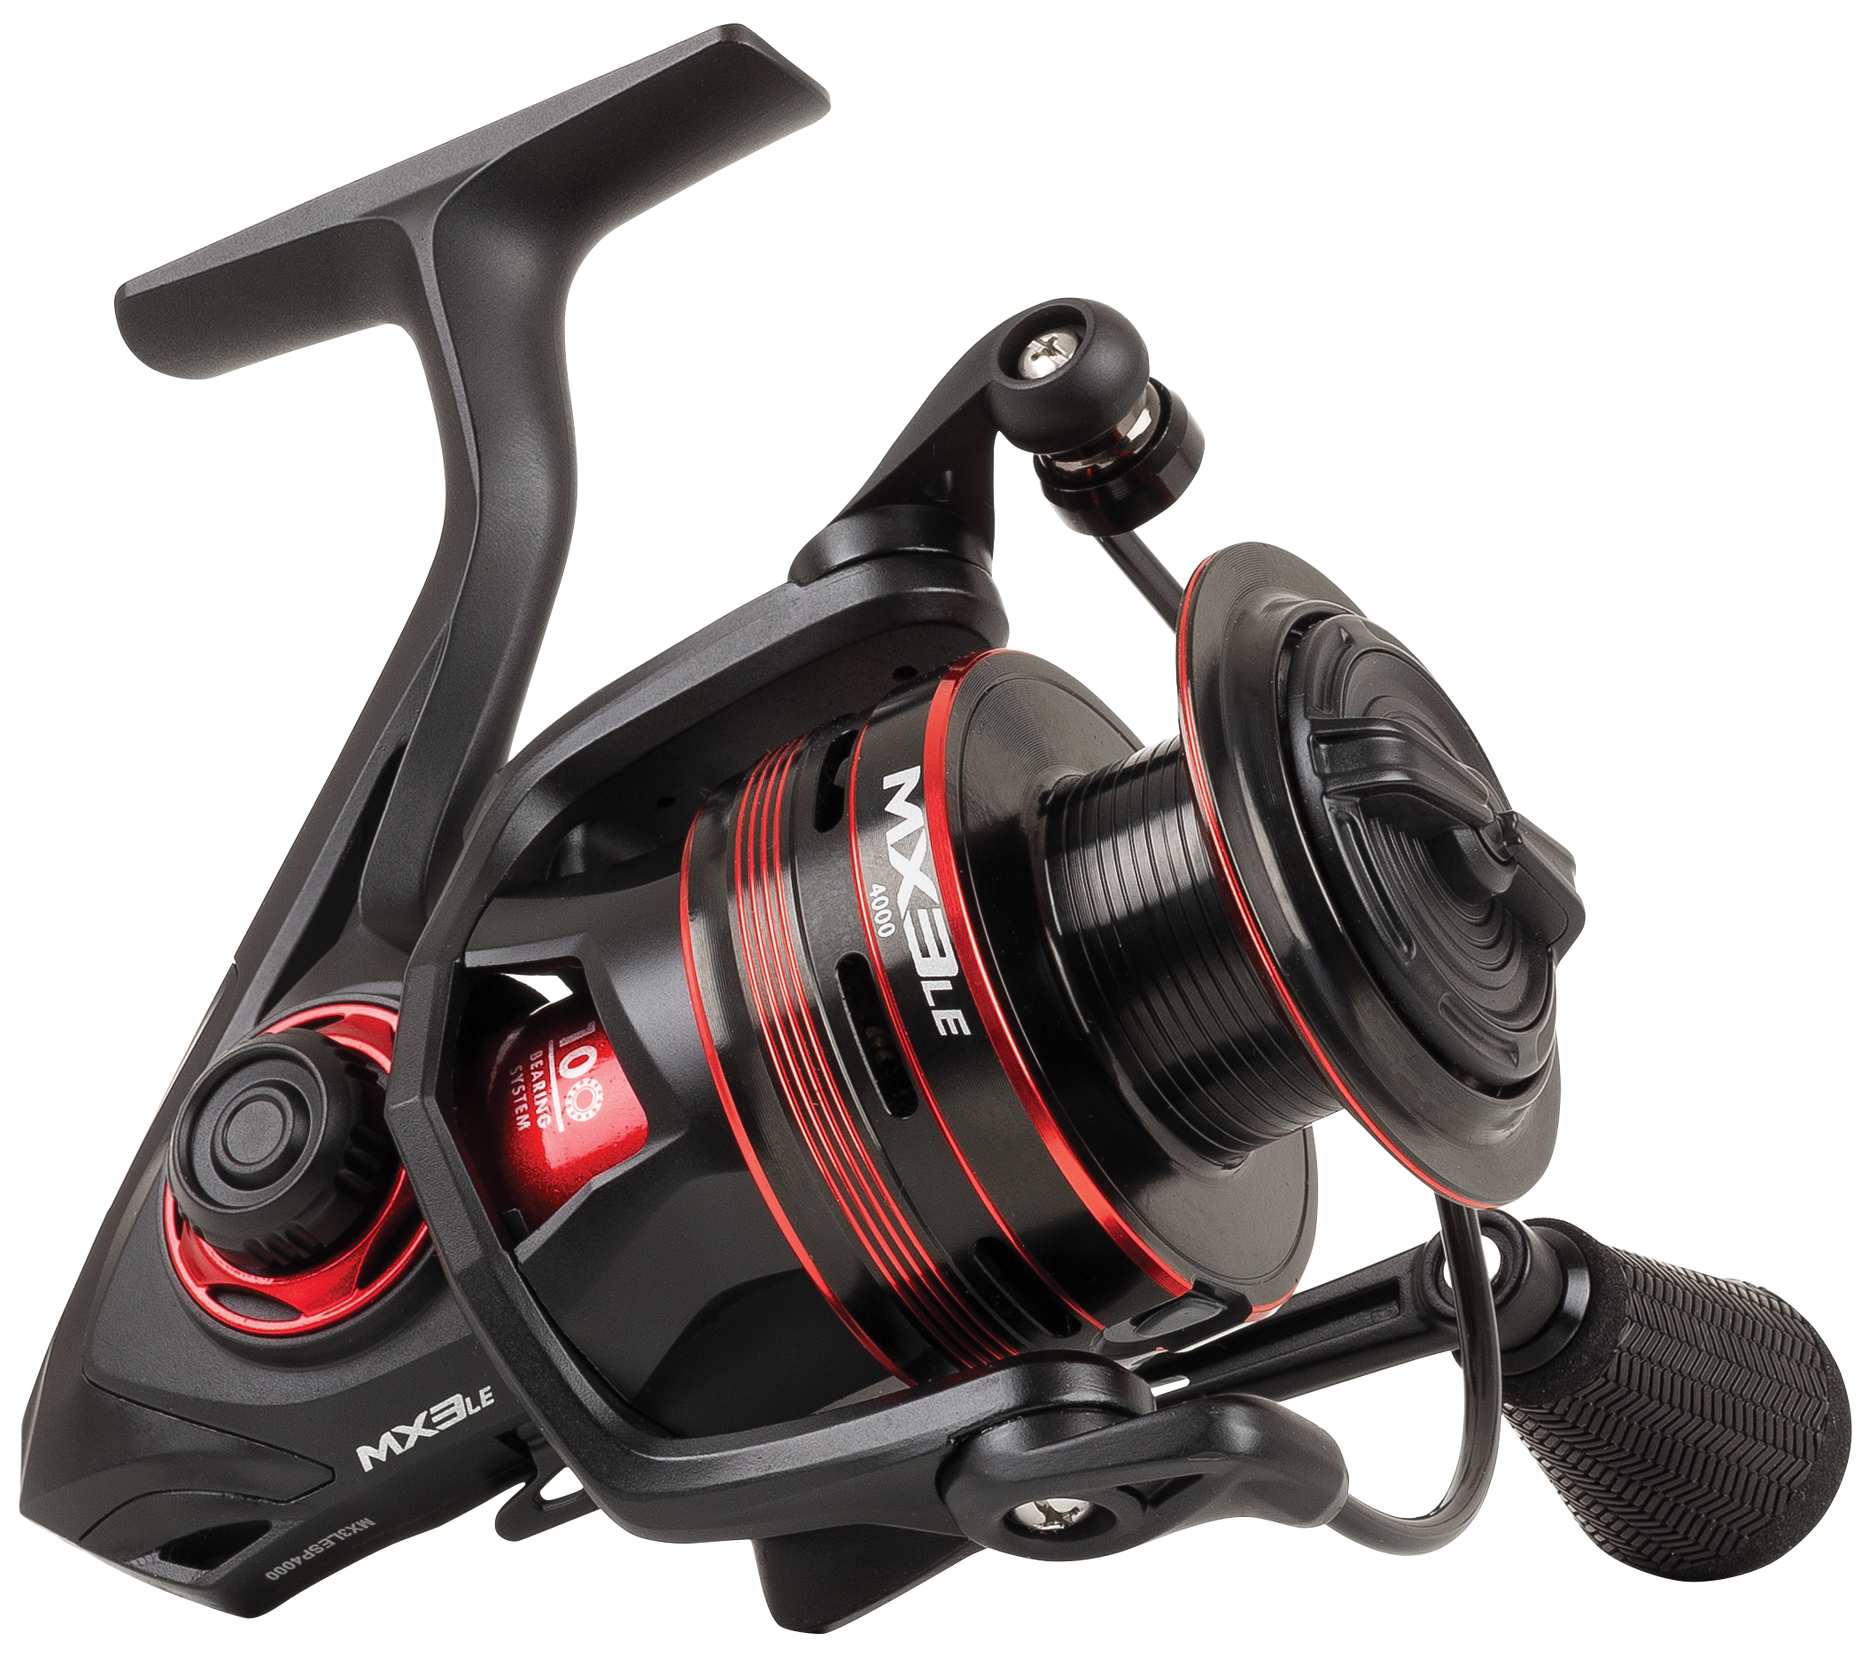 MITCHELL MX3LE SPINNING REEL 4000 FD - Reels